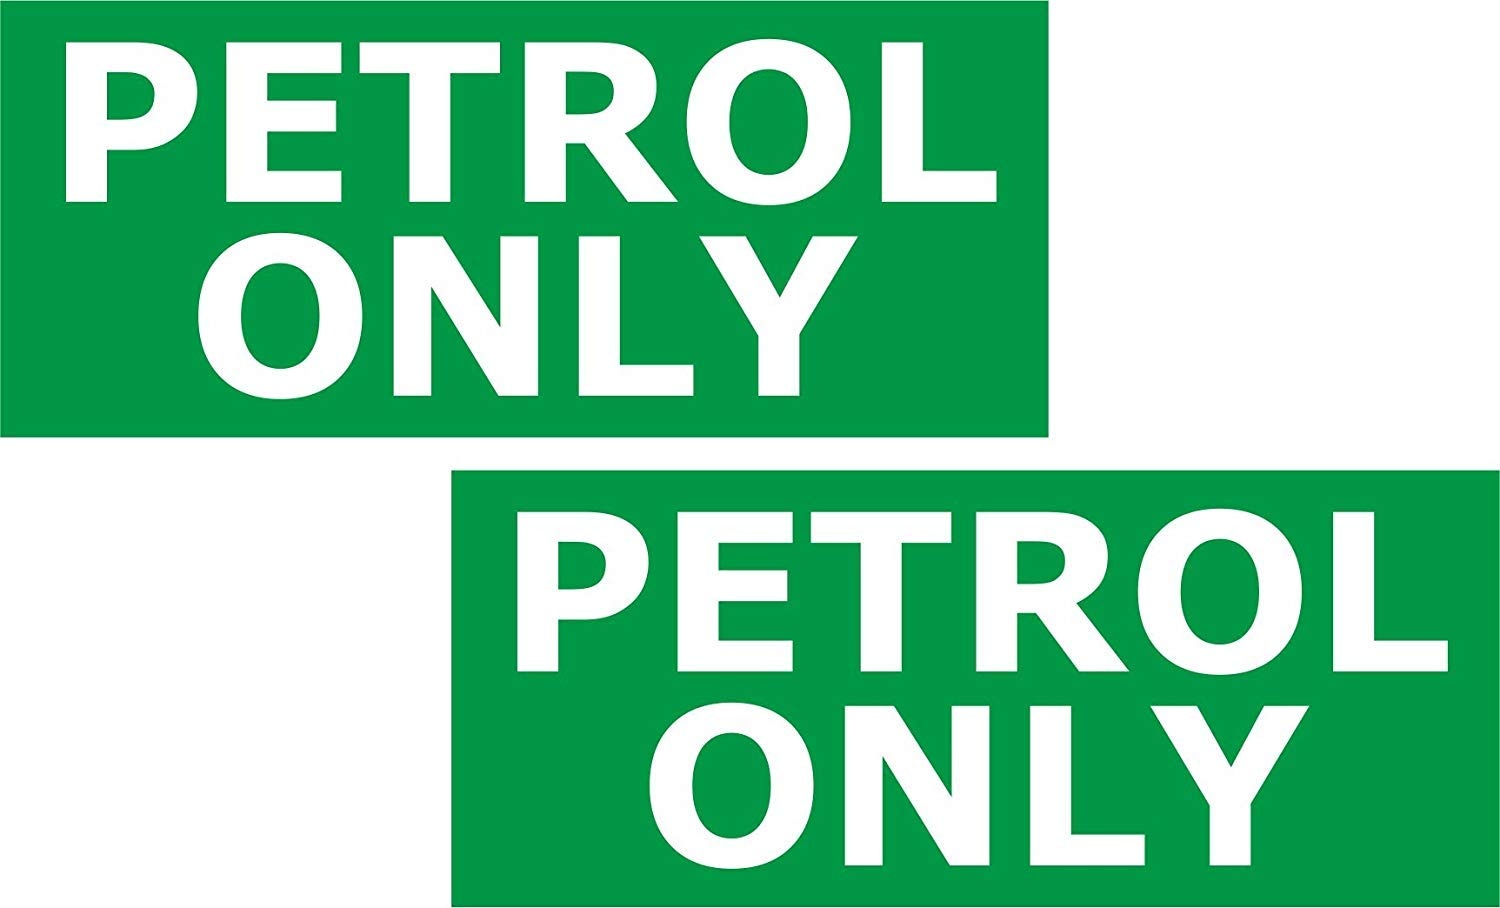 INDIGOS UG Petrol ONLY 60x25 mm Stickers - Pack of 2 Car or Van Round Fuel Reminder Decals